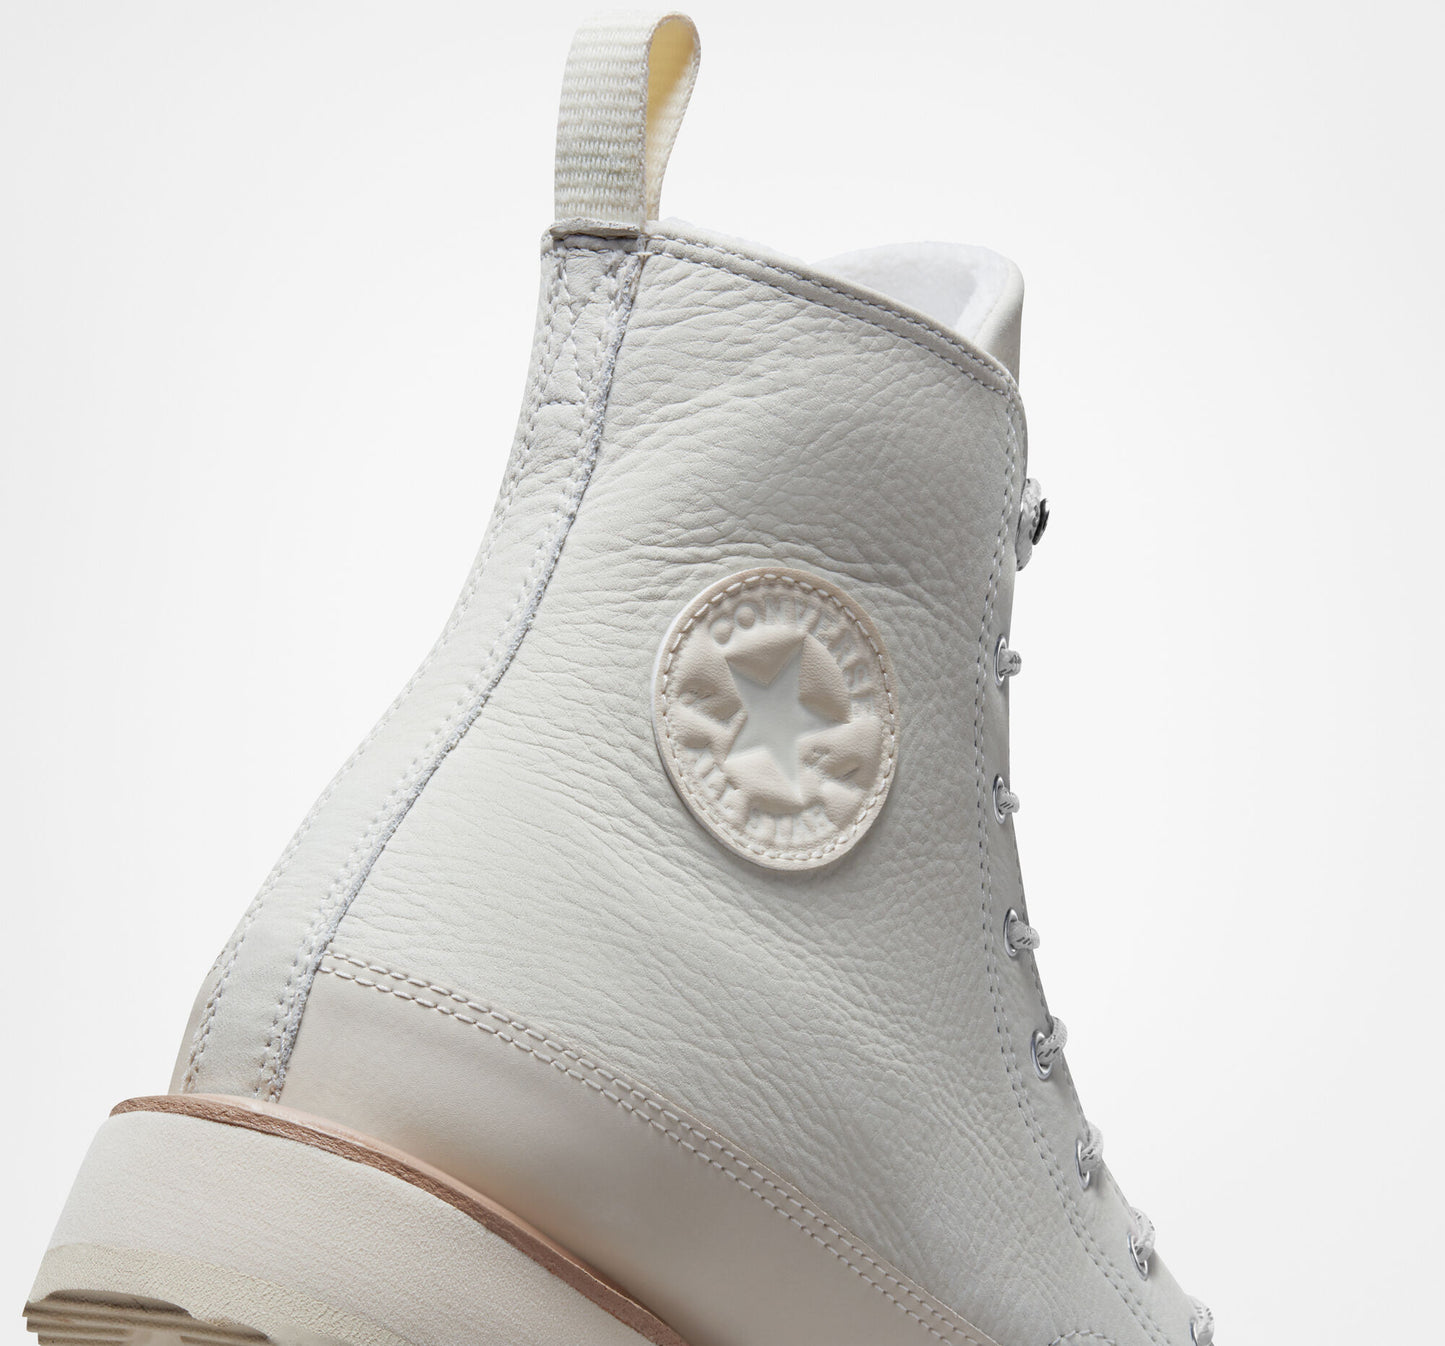 Converse Chuck Taylor Crafted Hi Top Boot, 173212C Multi Sizes Egret/Natural Ivory/Prime Pink